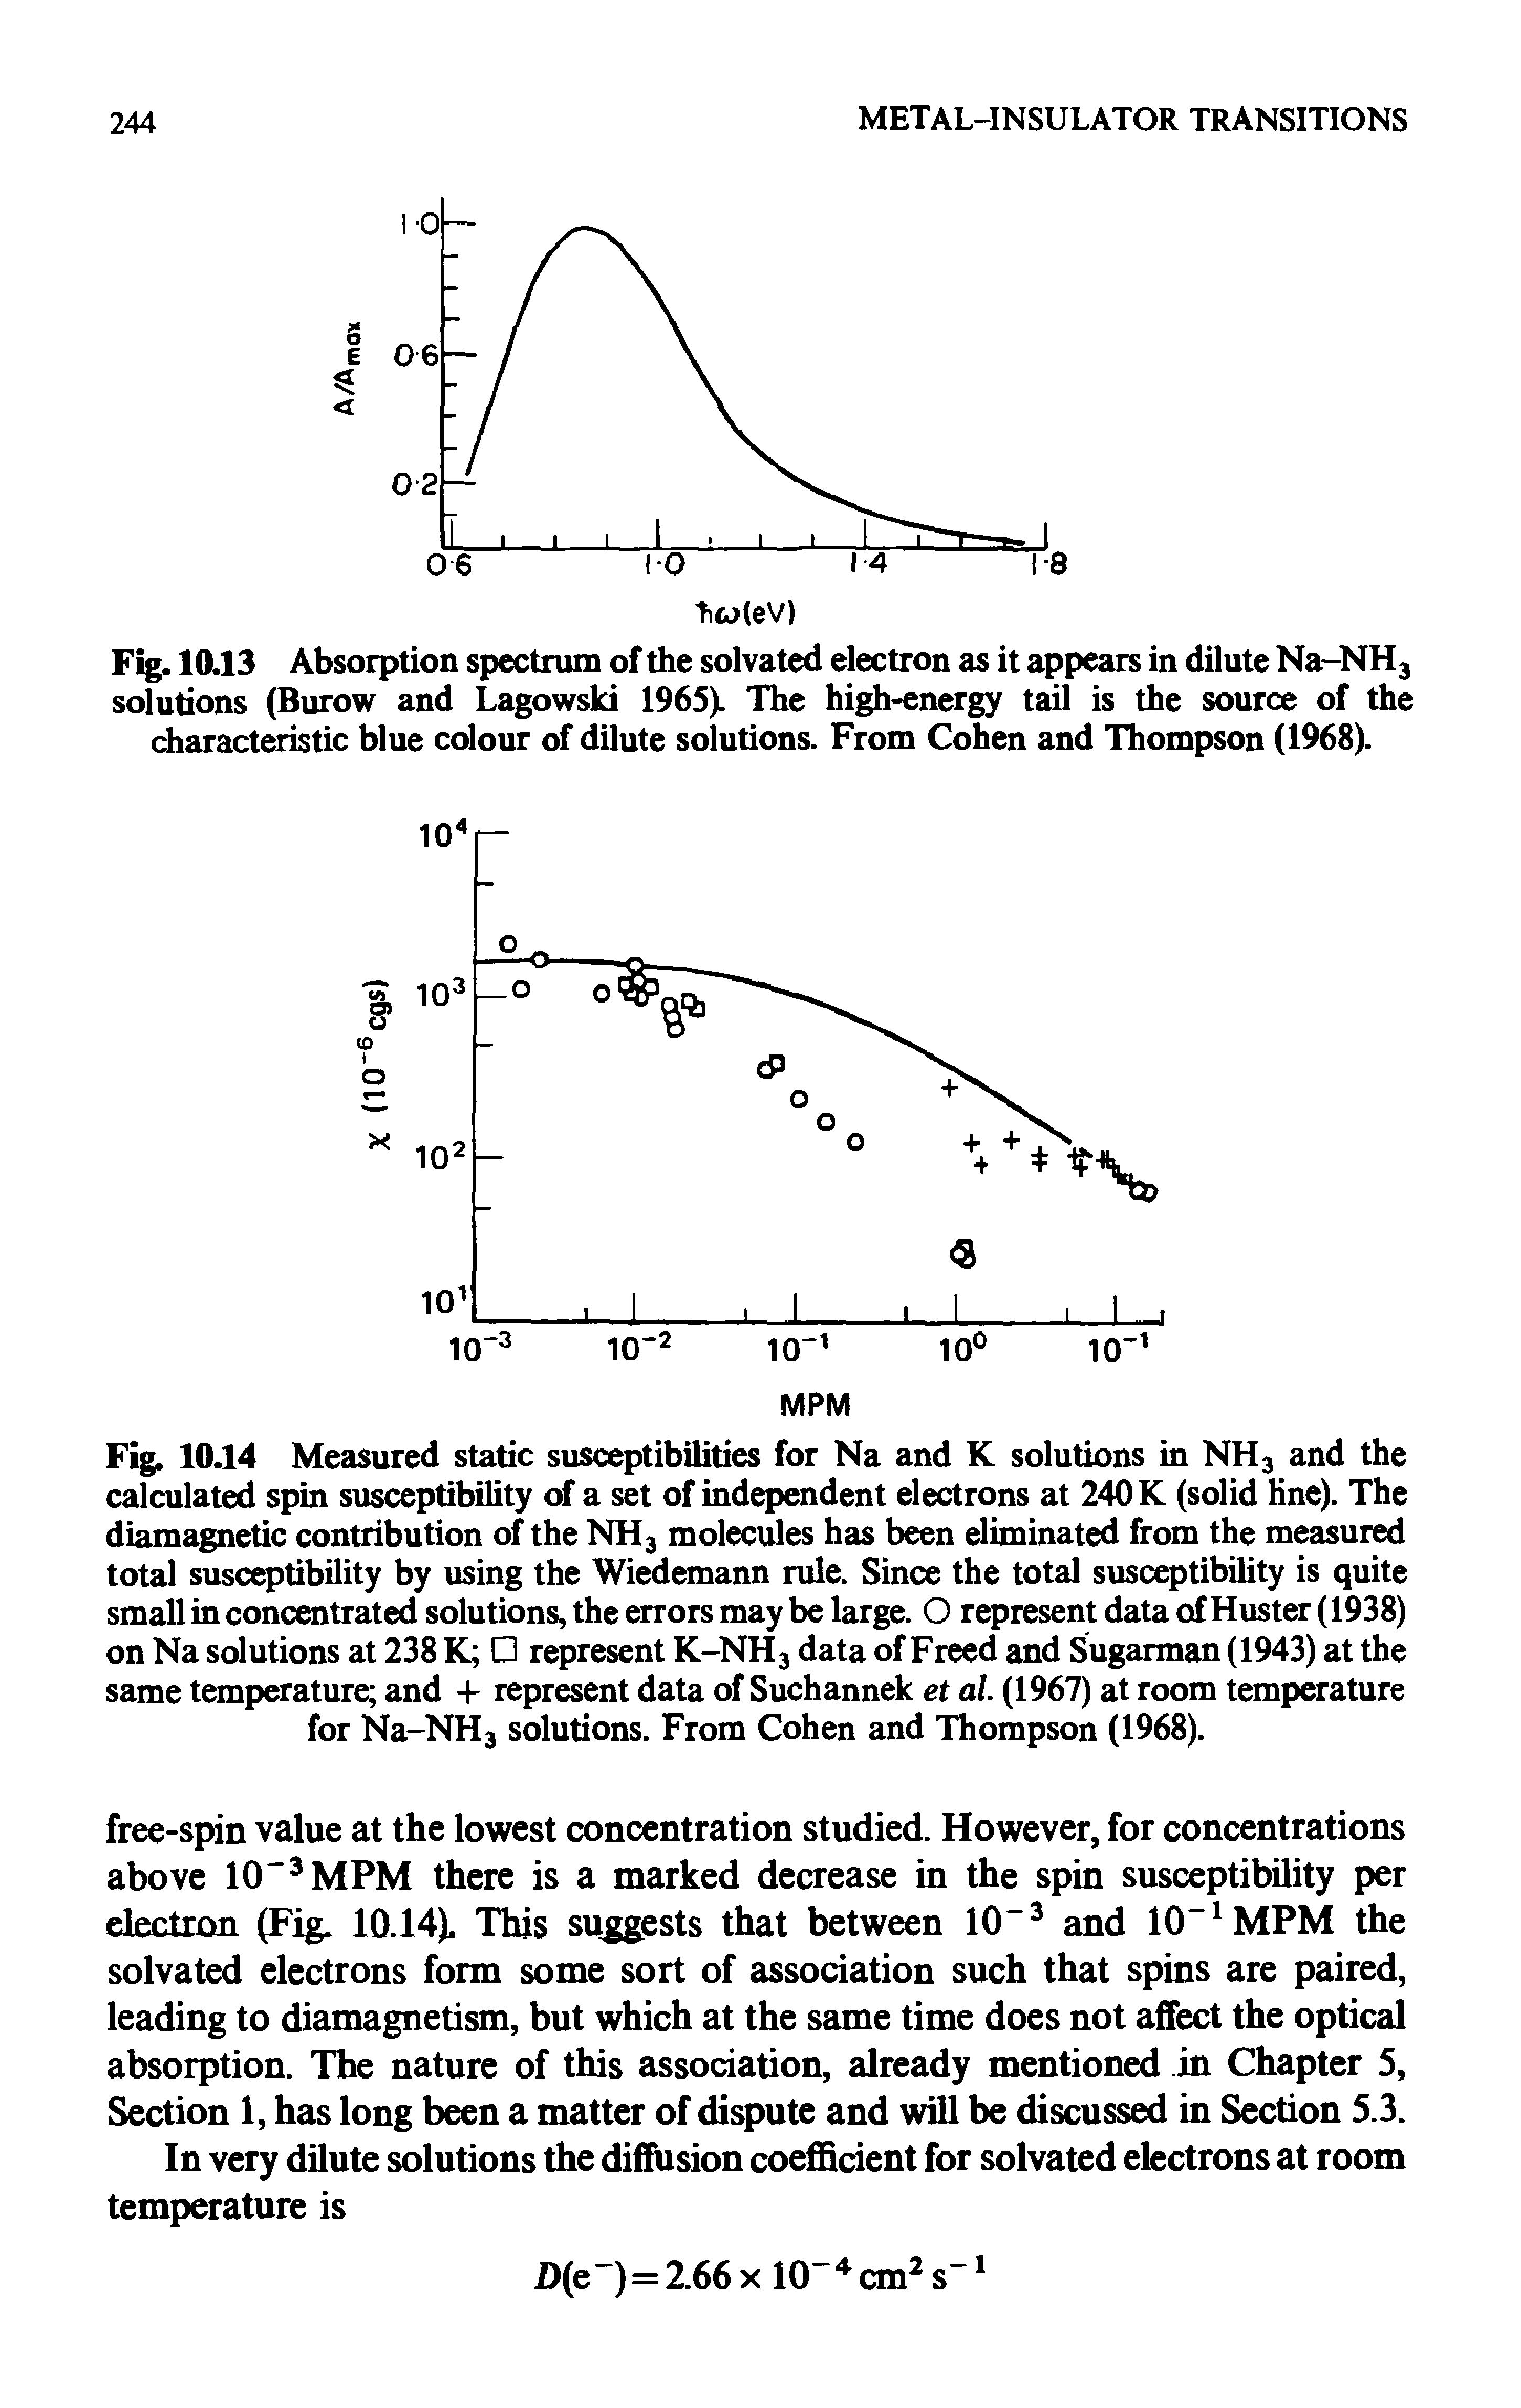 Fig. 10.14 Measured static susceptibilities for Na and K solutions in NH3 and the calculated spin susceptibility of a set of independent electrons at 240 K (solid line). The diamagnetic contribution of the NH3 molecules has been eliminated from the measured total susceptibility by using the Wiedemann rule. Since the total susceptibility is quite small in concentrated solutions, the errors may be large. O represent data of Huster (1938) on Na solutions at 238 K represent K-NH3 data of Freed and Sugarman (1943) at the same temperature and + represent data of Suchannek et al. (1967) at room temperature for Na-NH3 solutions. From Cohen and Thompson (1968).